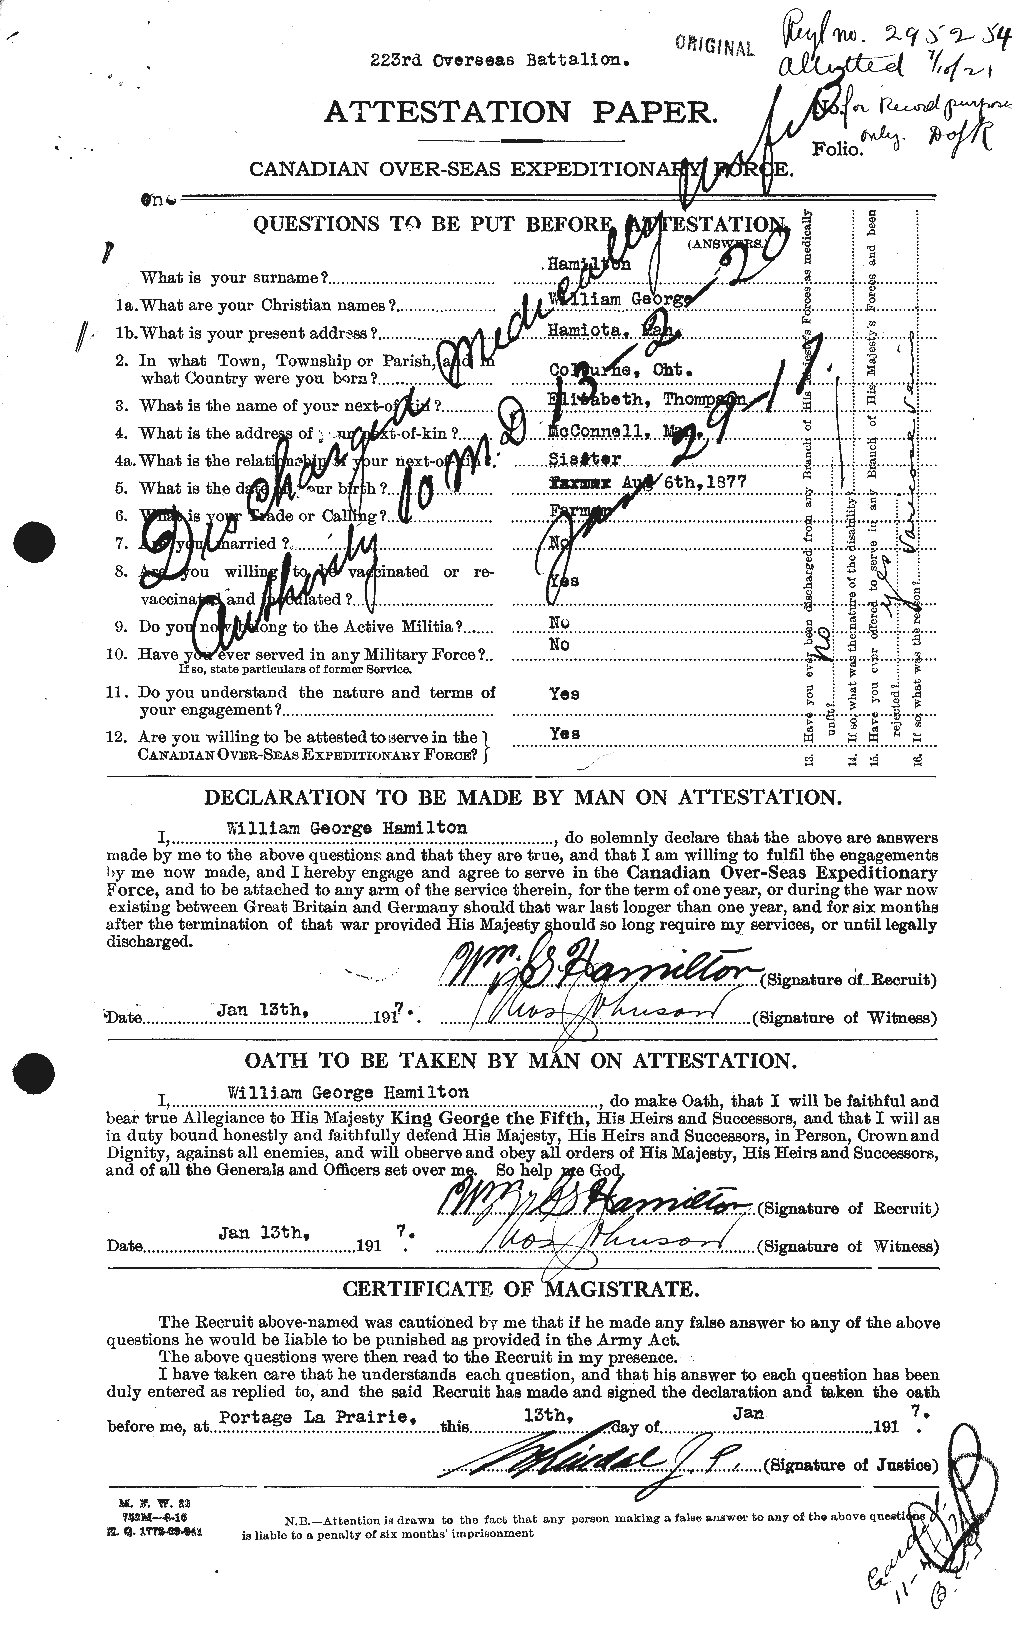 Personnel Records of the First World War - CEF 374889a